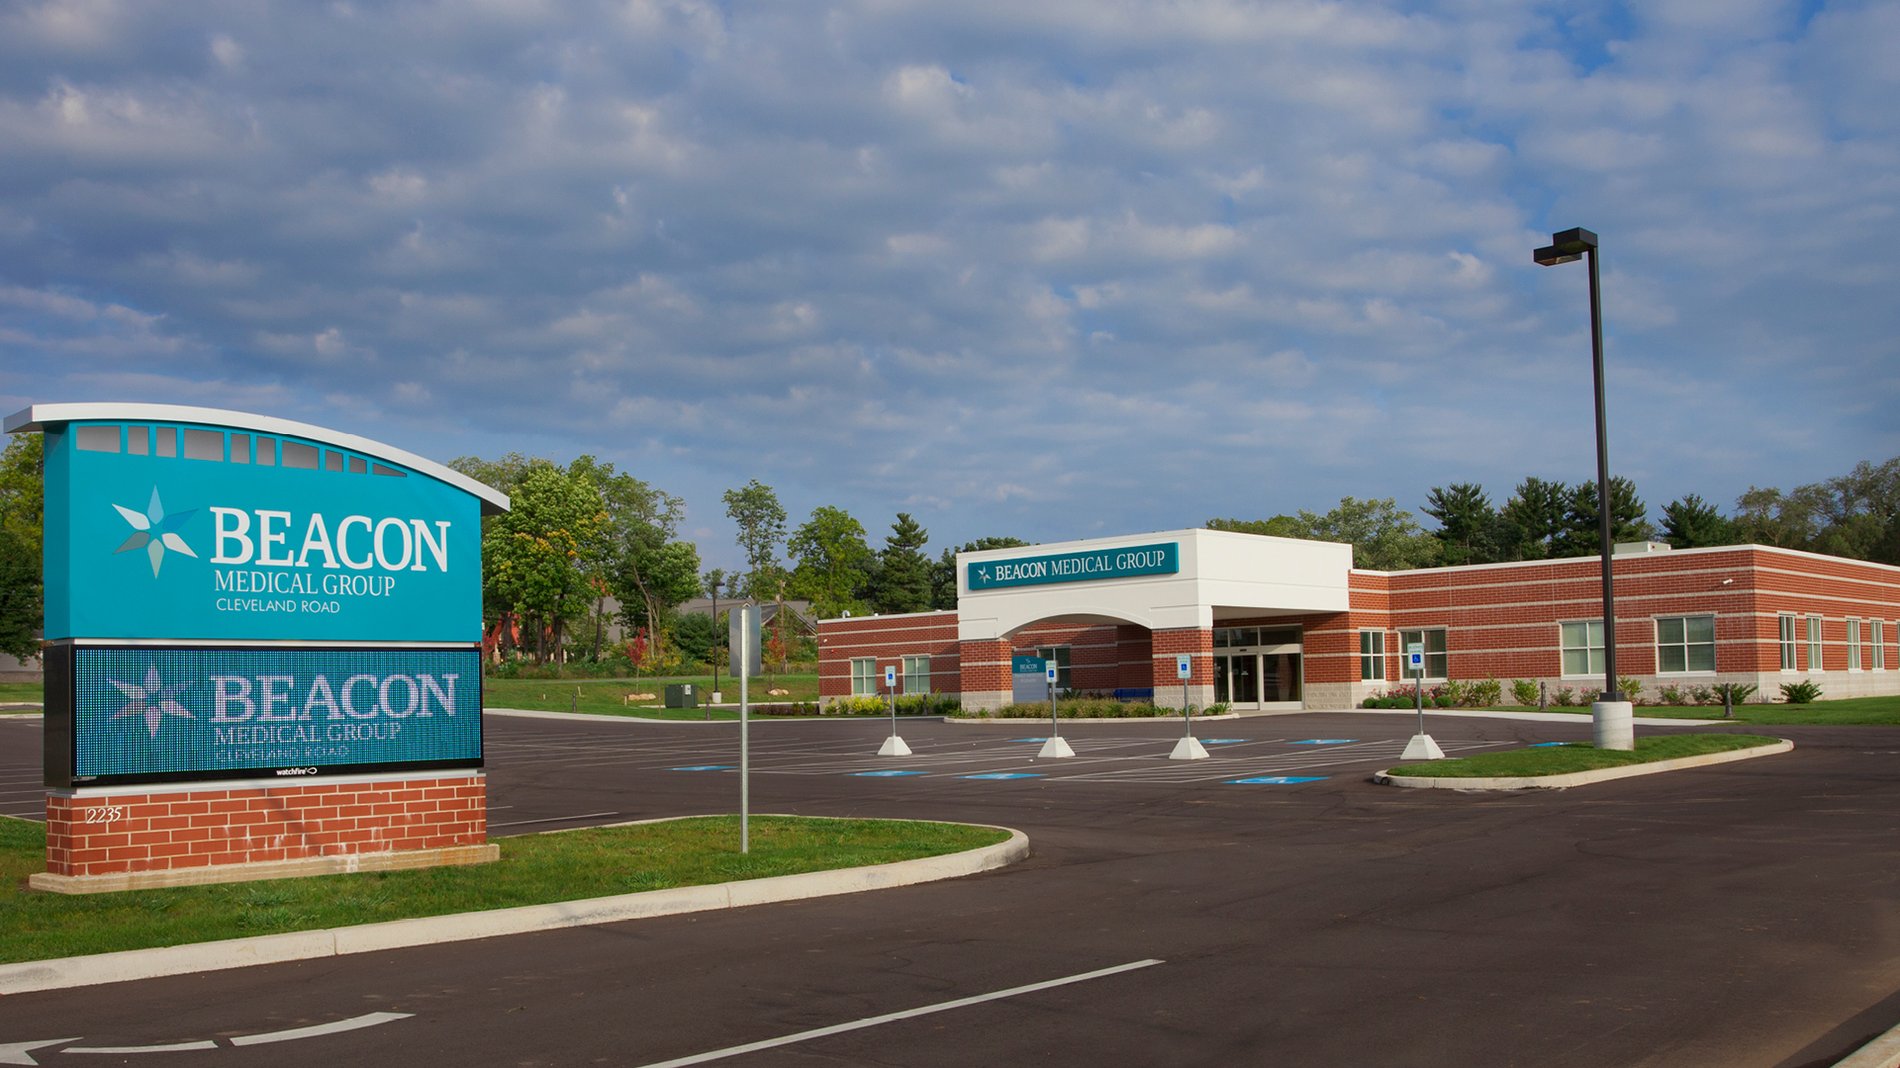 A modern teal sign stands in front of the brick building Beacon Medical Group Cleveland Road.